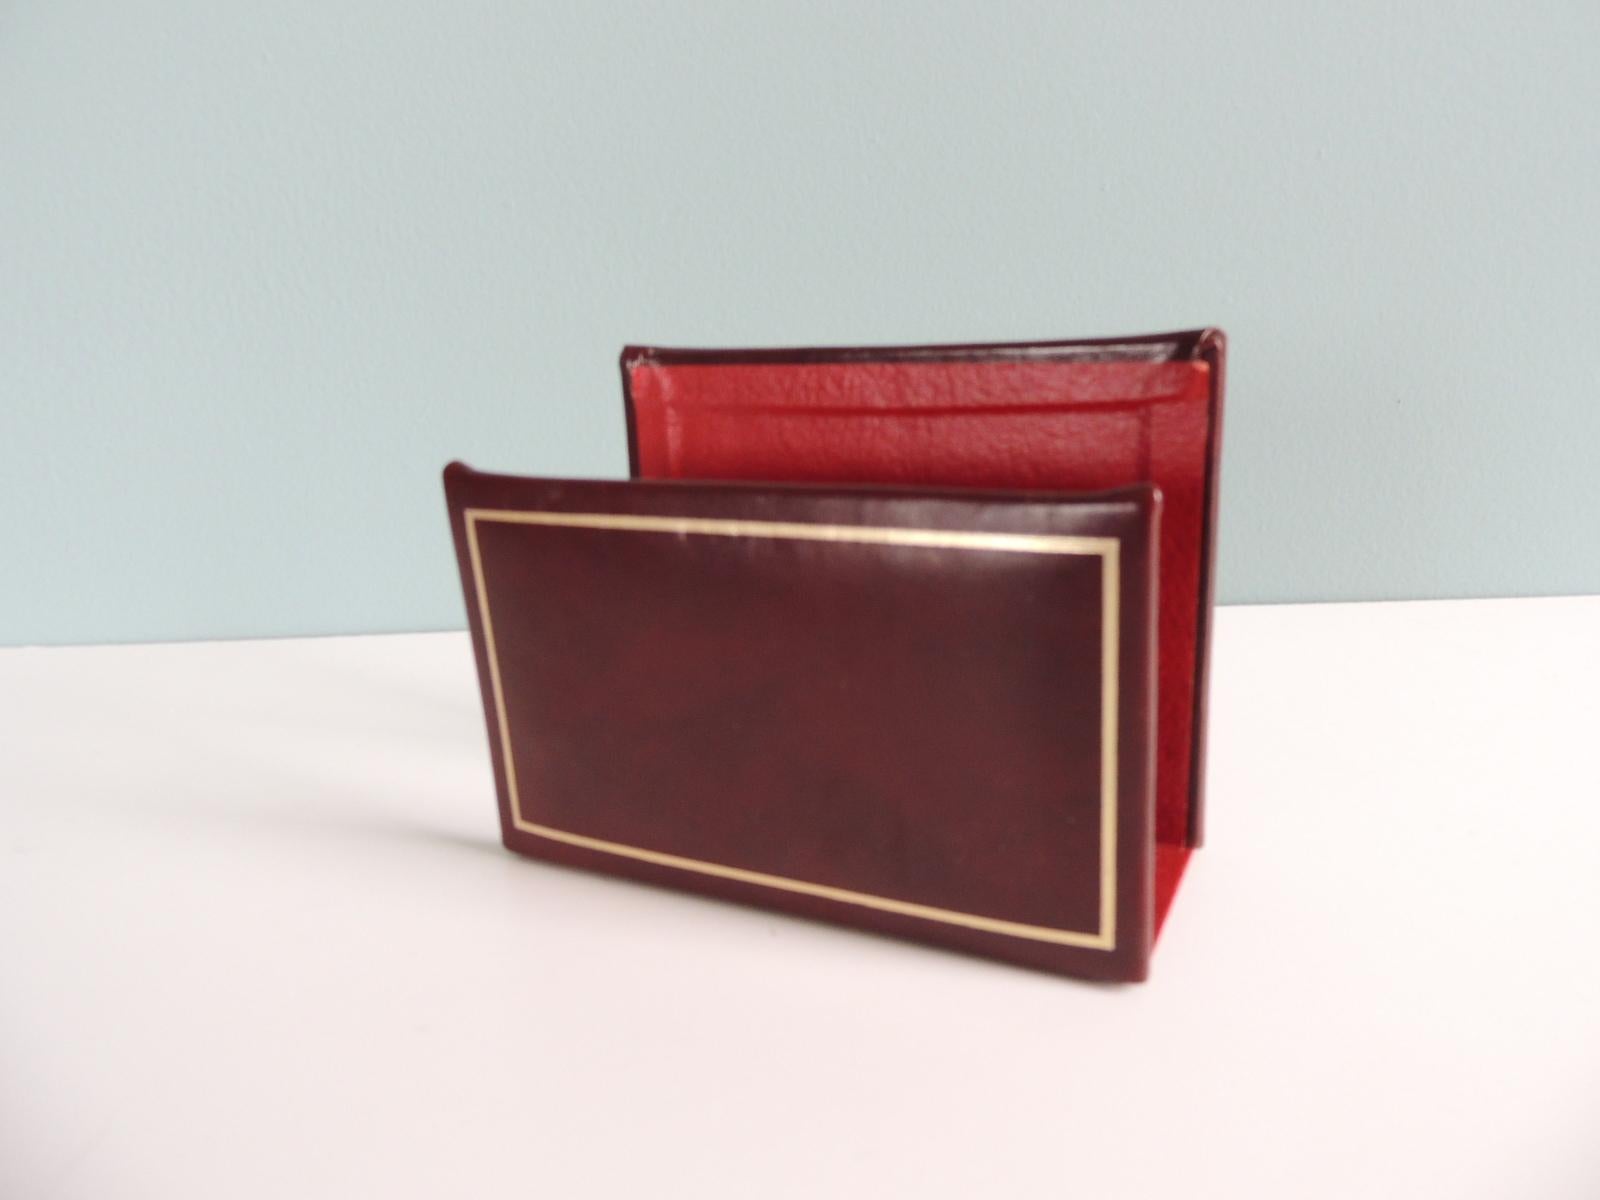 Brown Reddish leather stationary or letter holder
Gold detail embossed leather.
Stamped: 